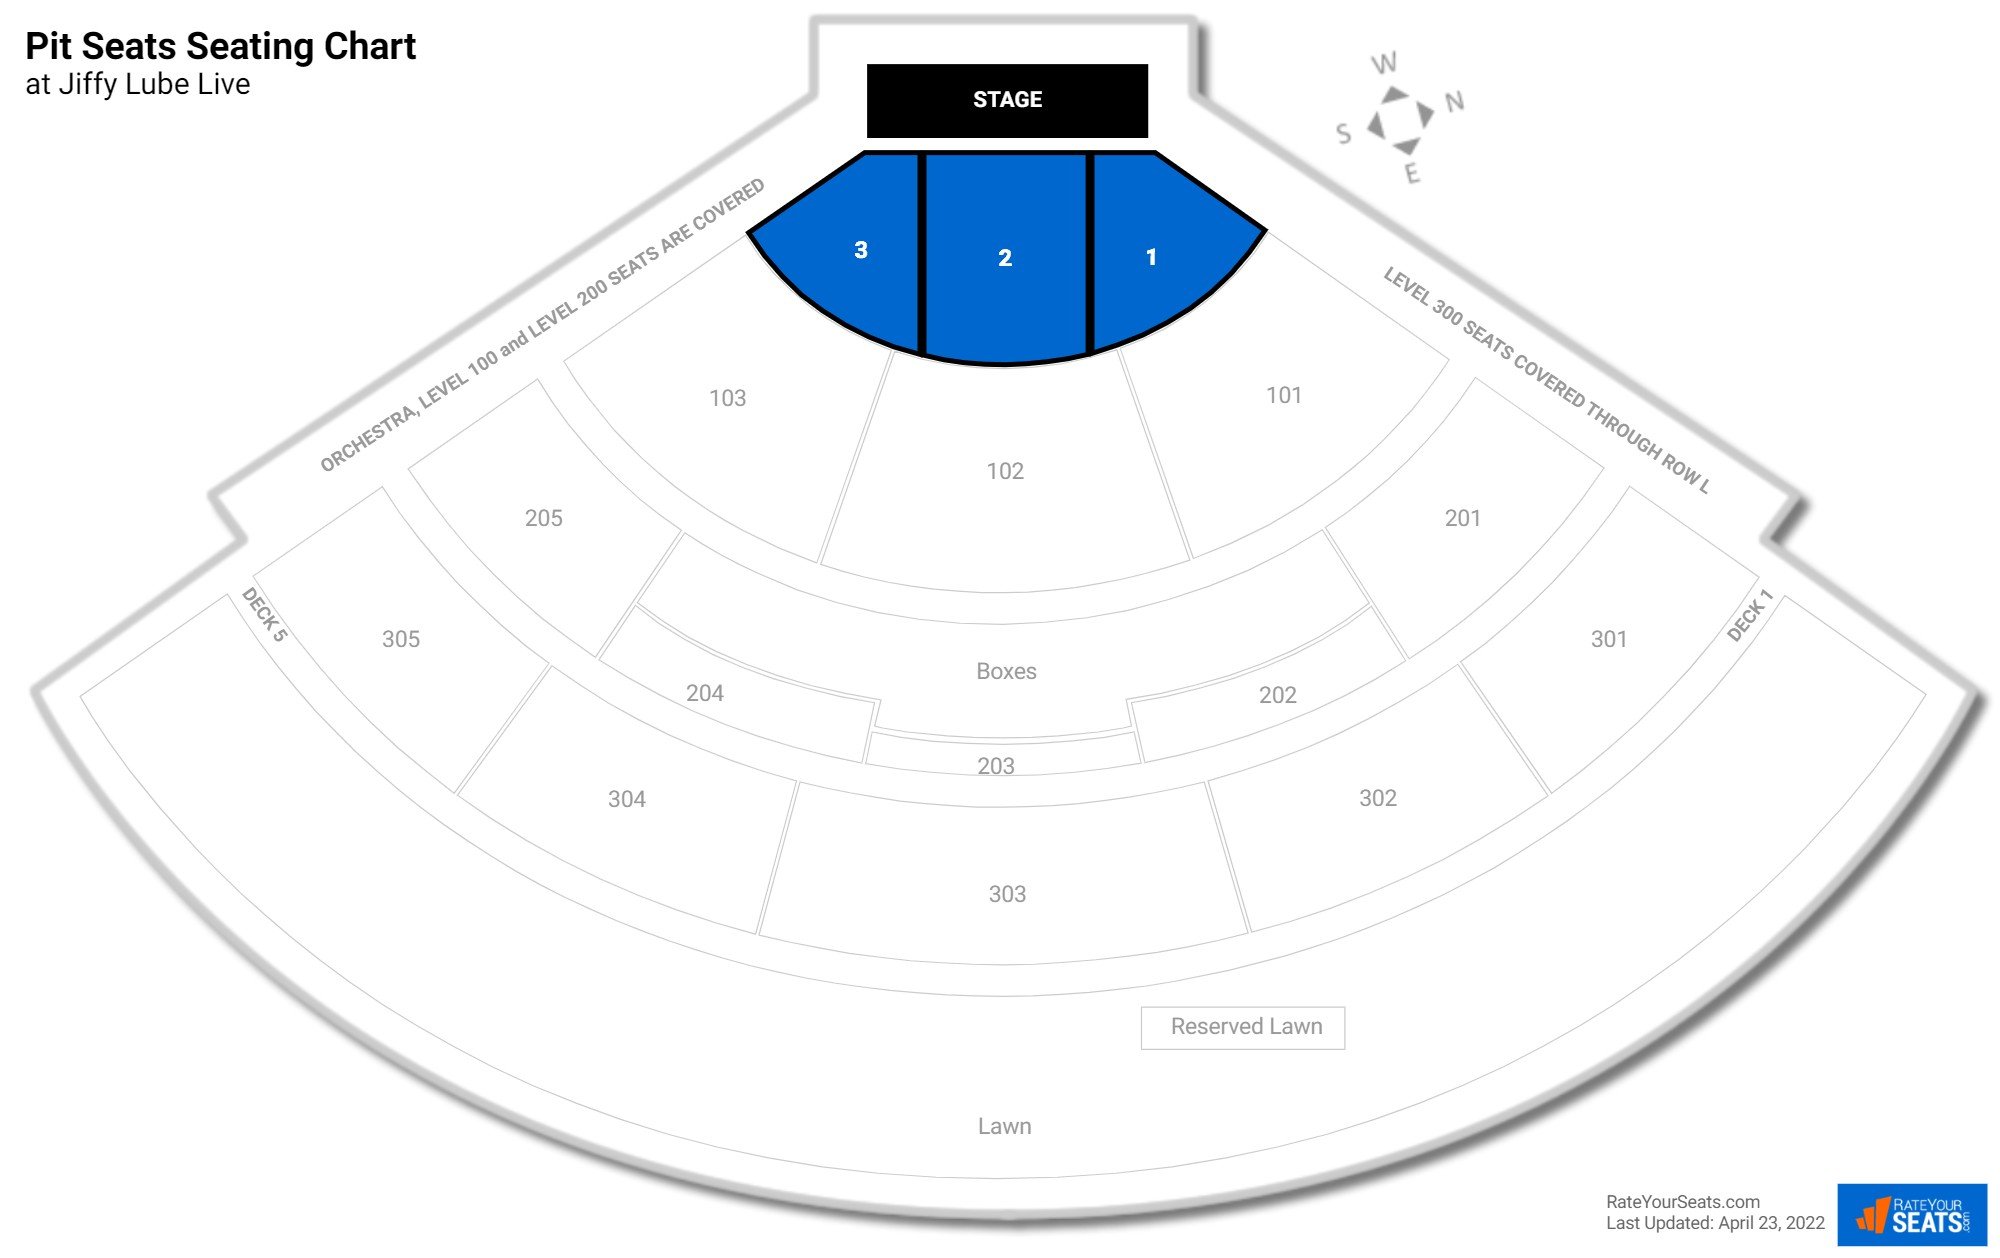 Concert Pit Seats Seating Chart at Jiffy Lube Live